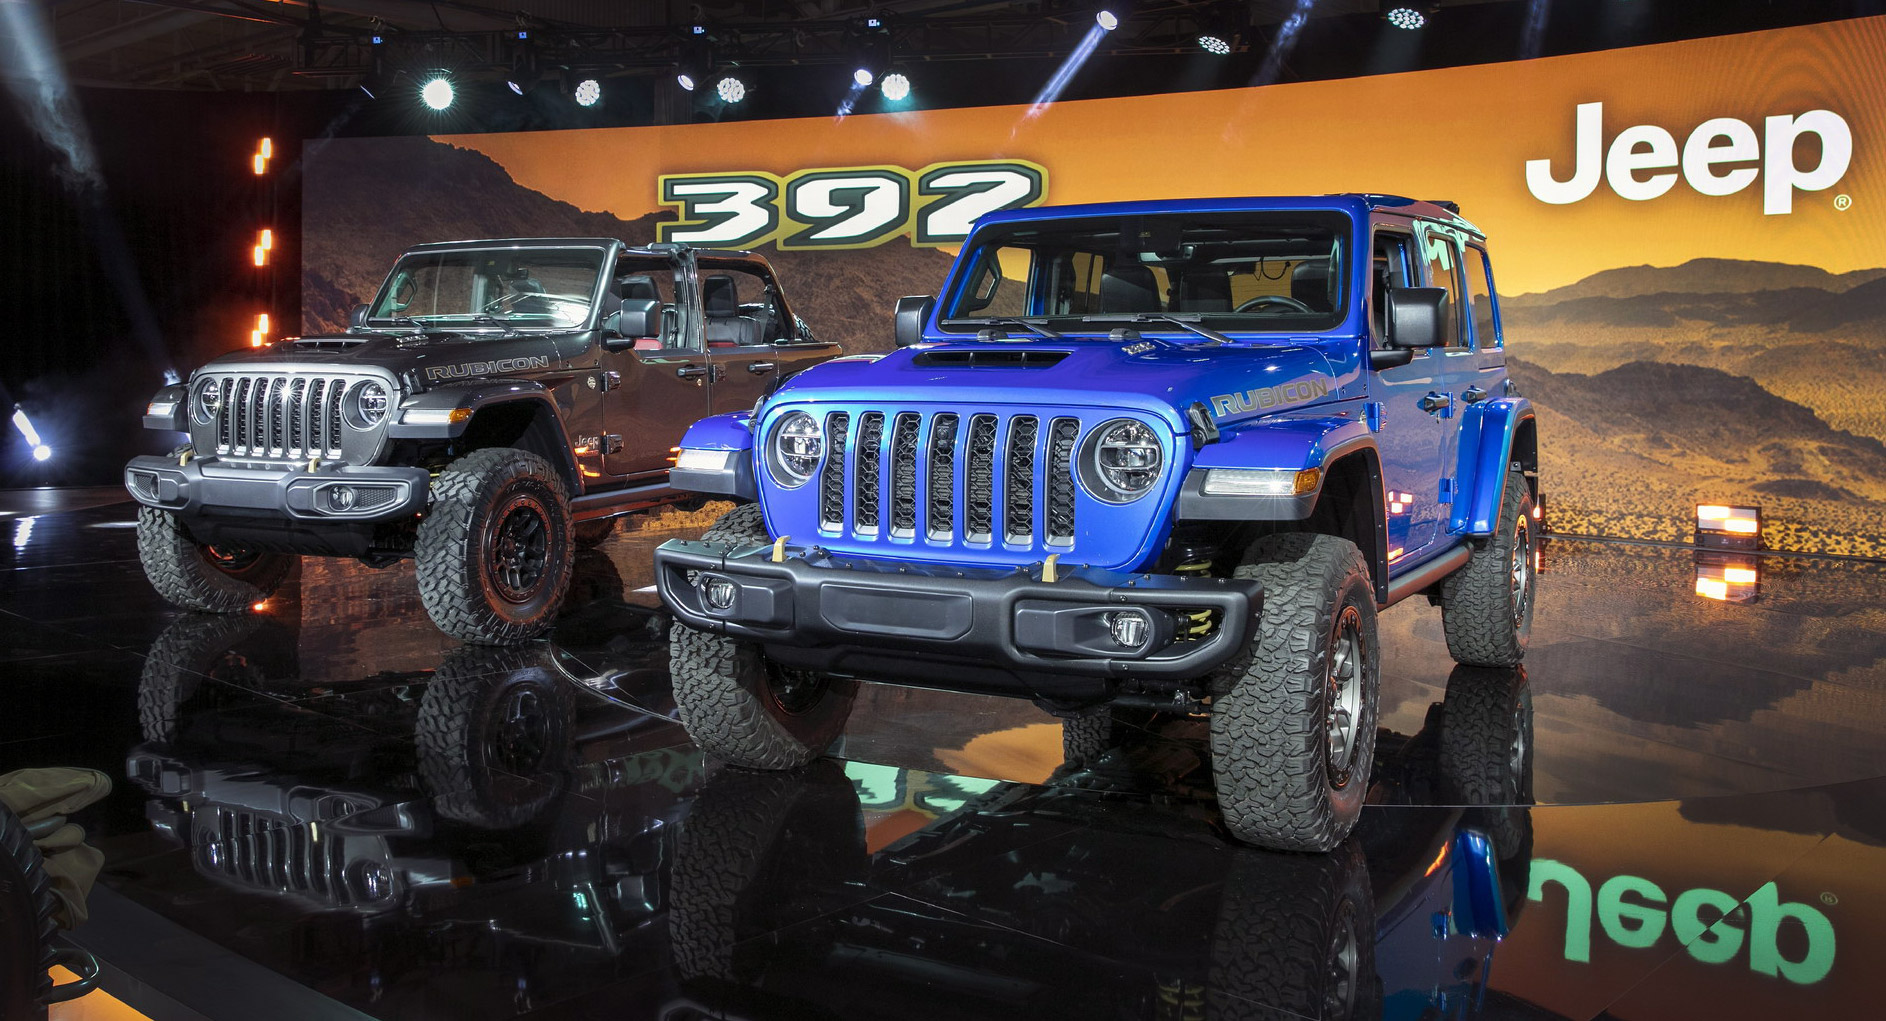 Jeep Throws A 470HP Hemi V8 In The 2021 Wrangler Rubicon 392 That Does 0-60  In Just  sec | Carscoops